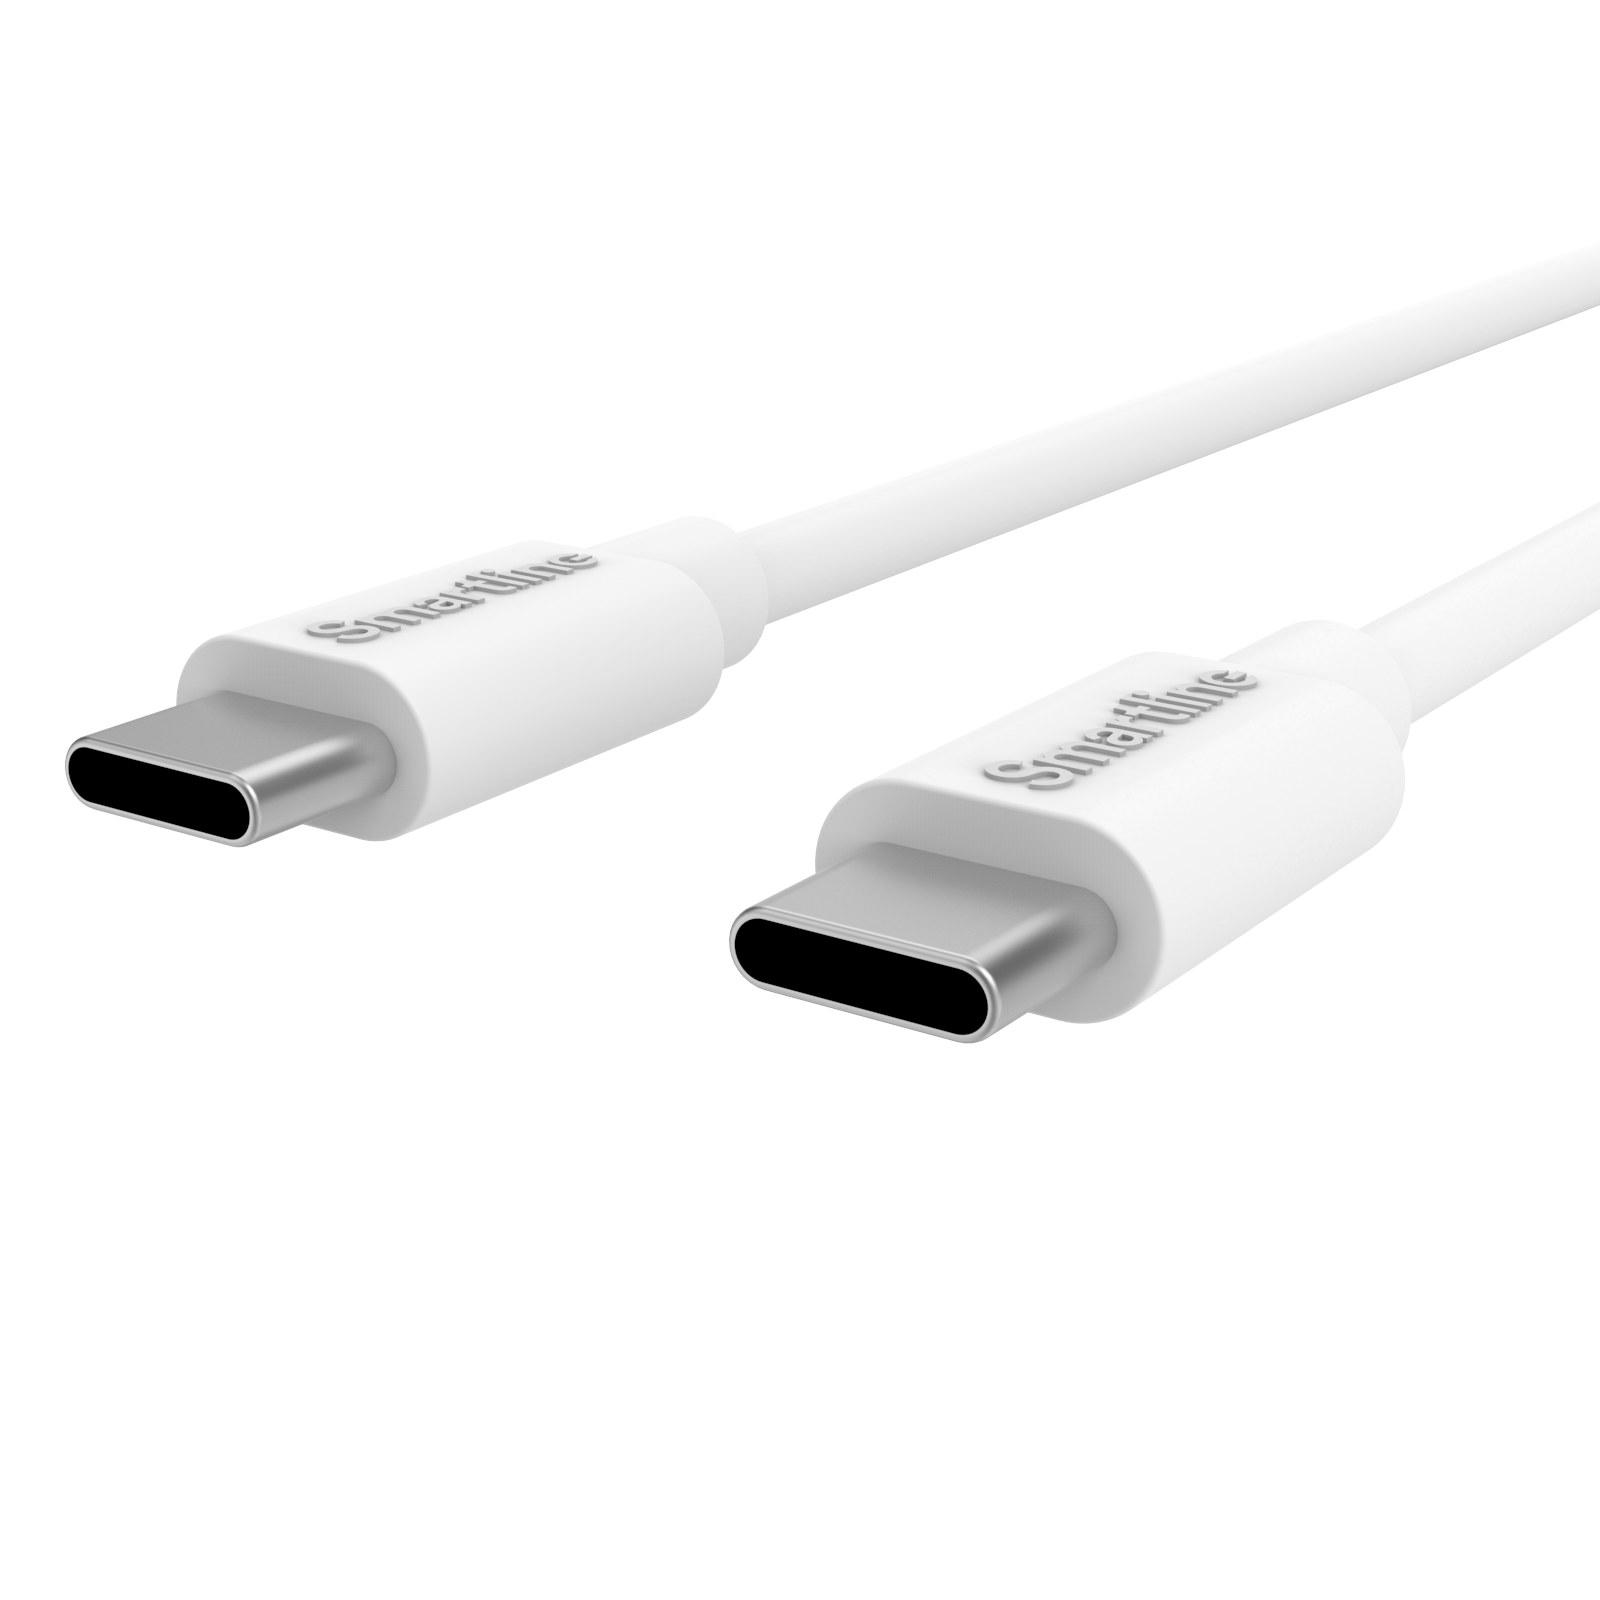 Complete iPad Charger with USB-C - 2m Cable and Wall Charger - Smartline